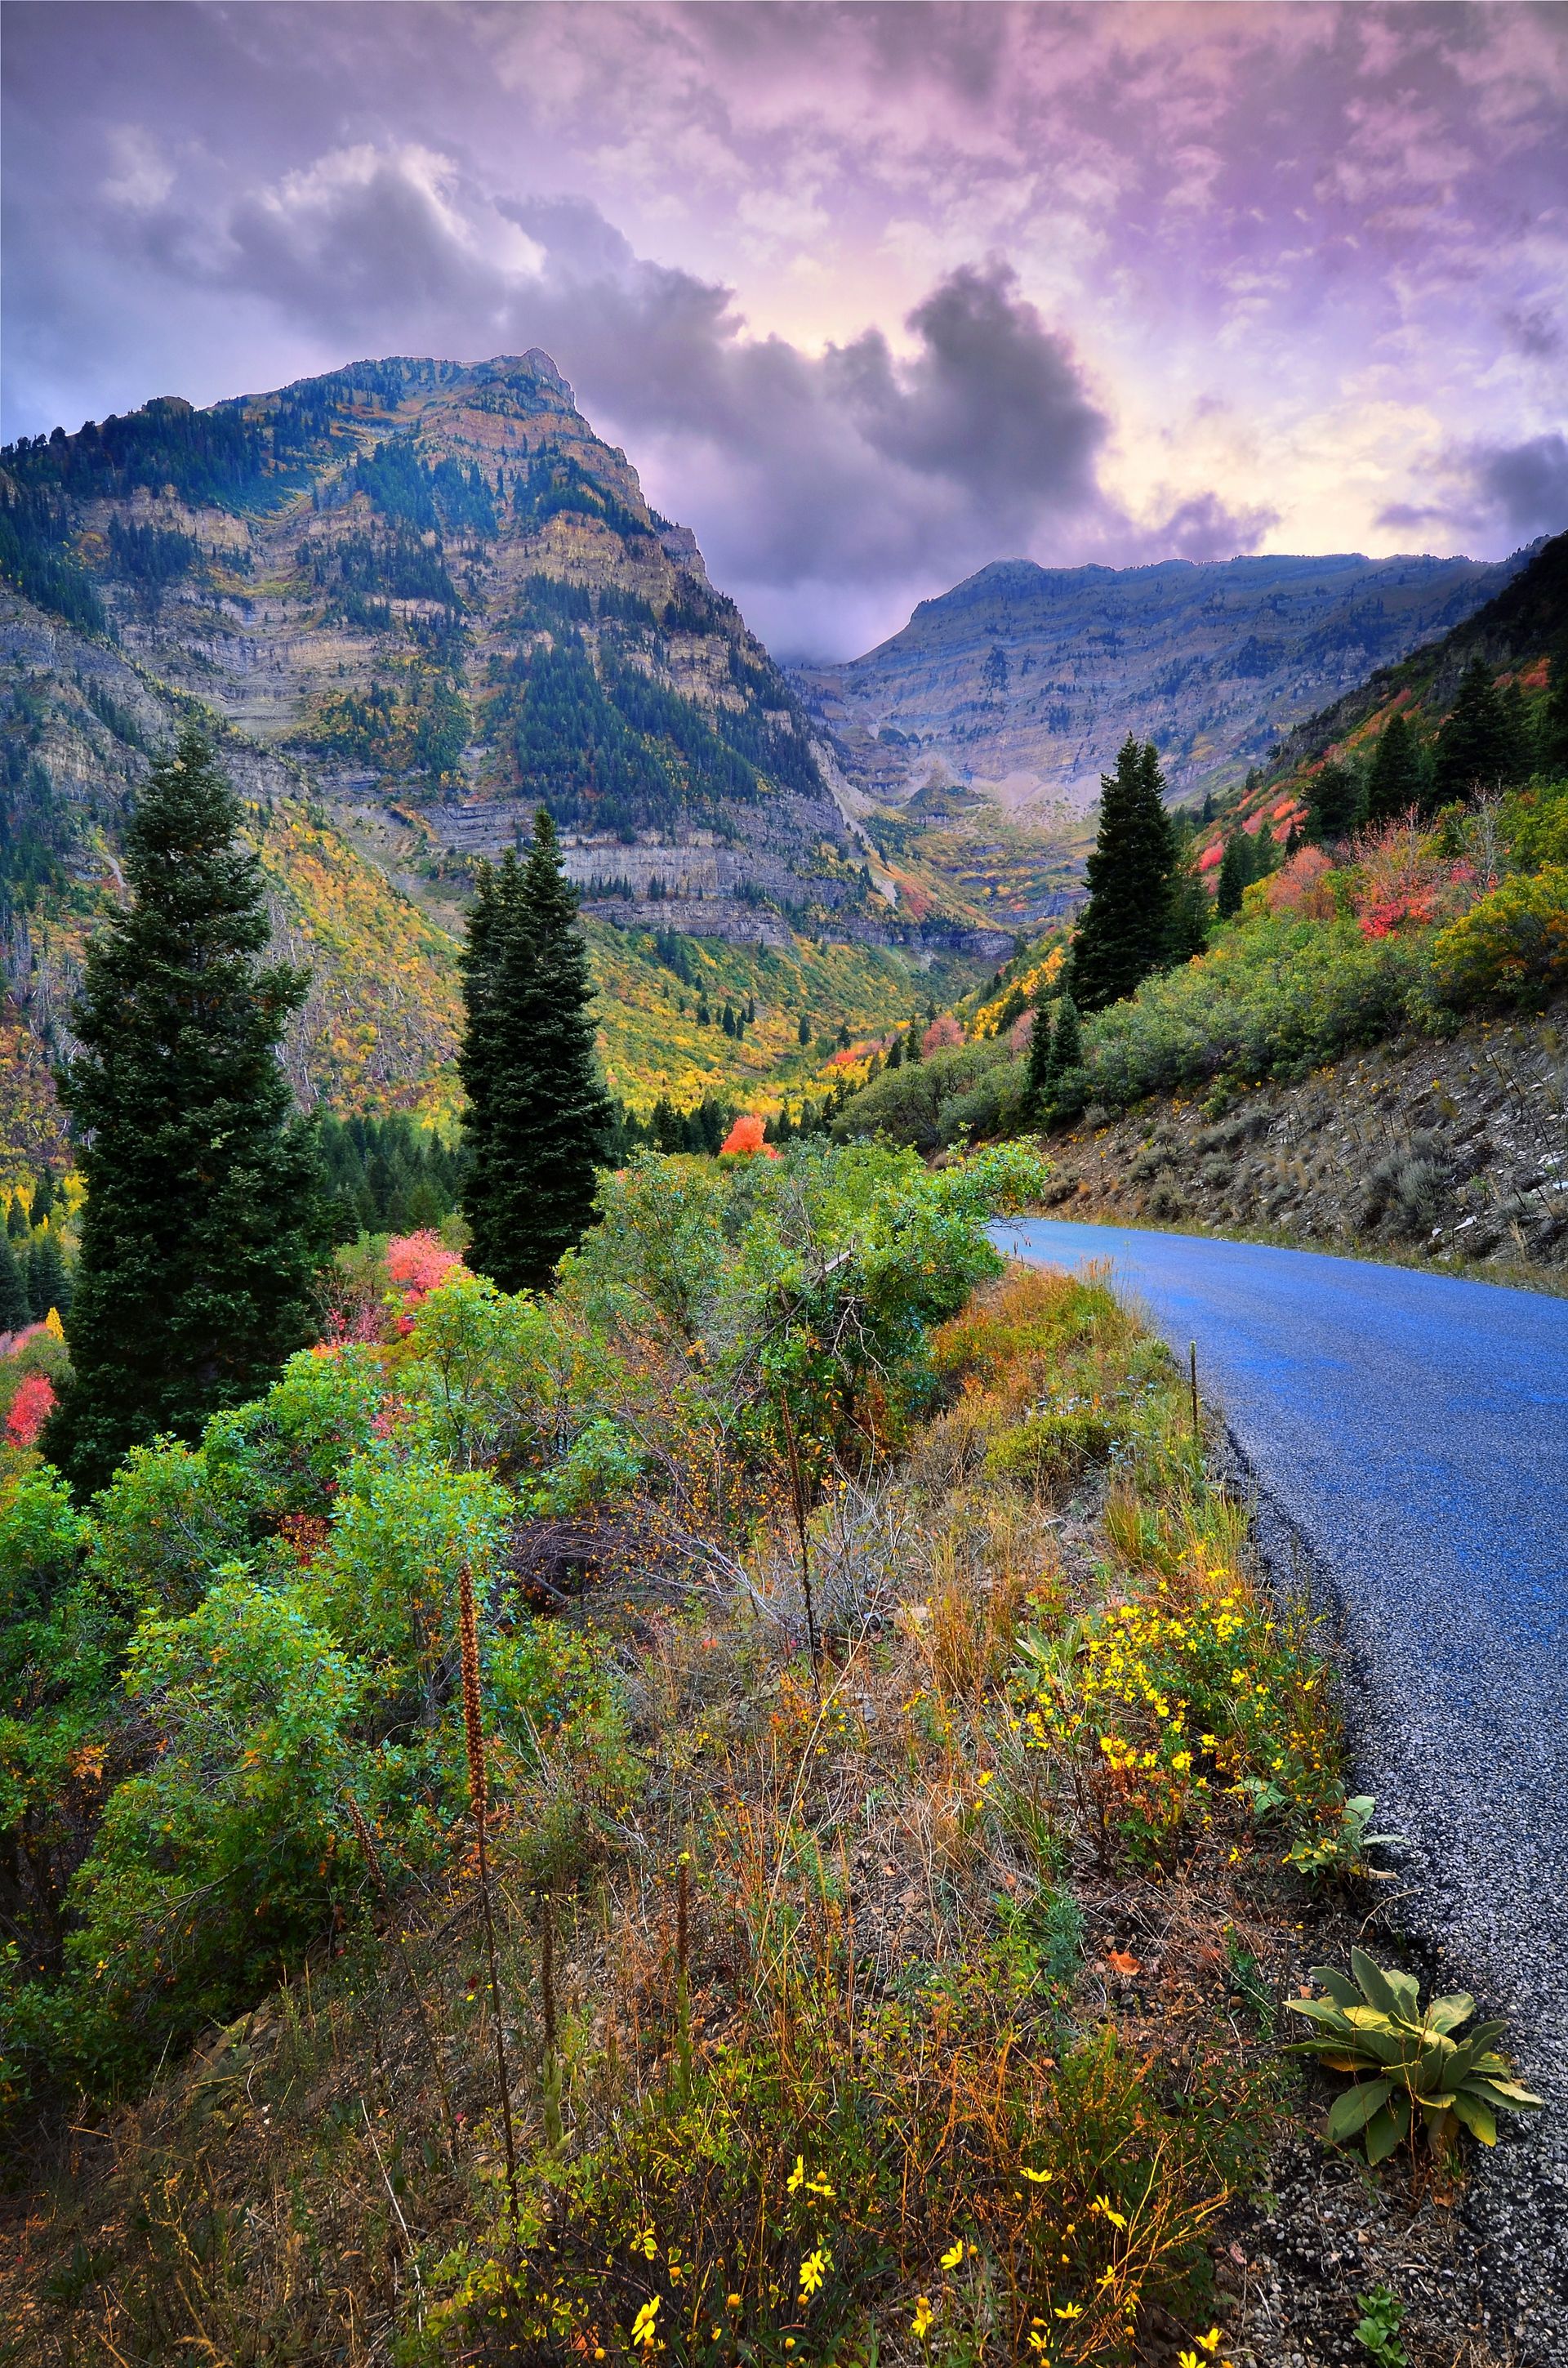 A road passing through a canyon of colorful trees in the autumn.